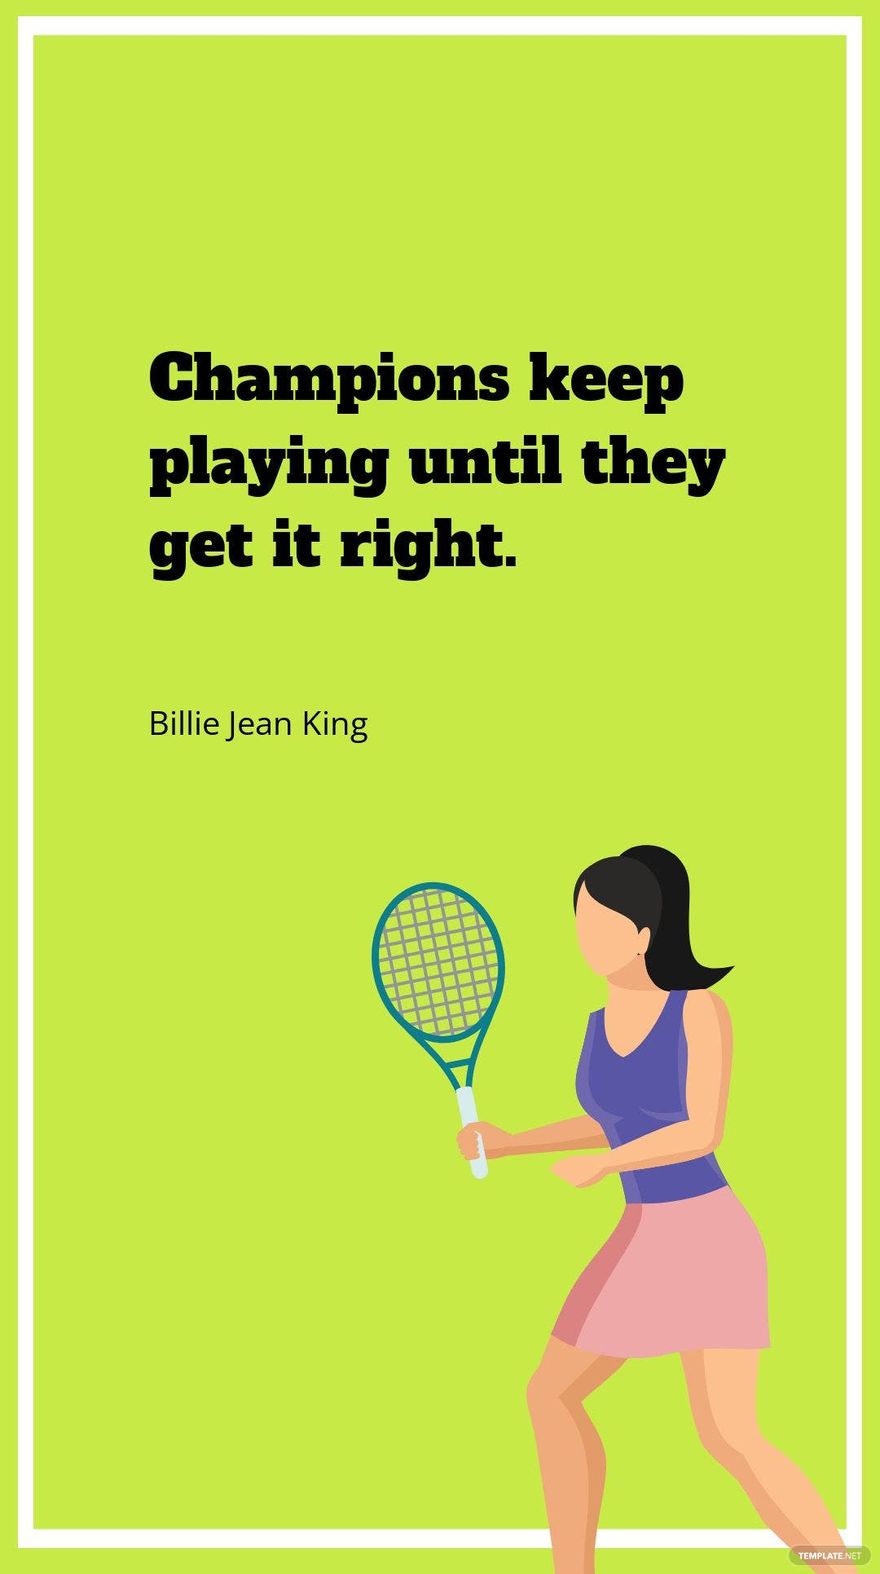 Billie Jean King - Champions keep playing until they get it right.